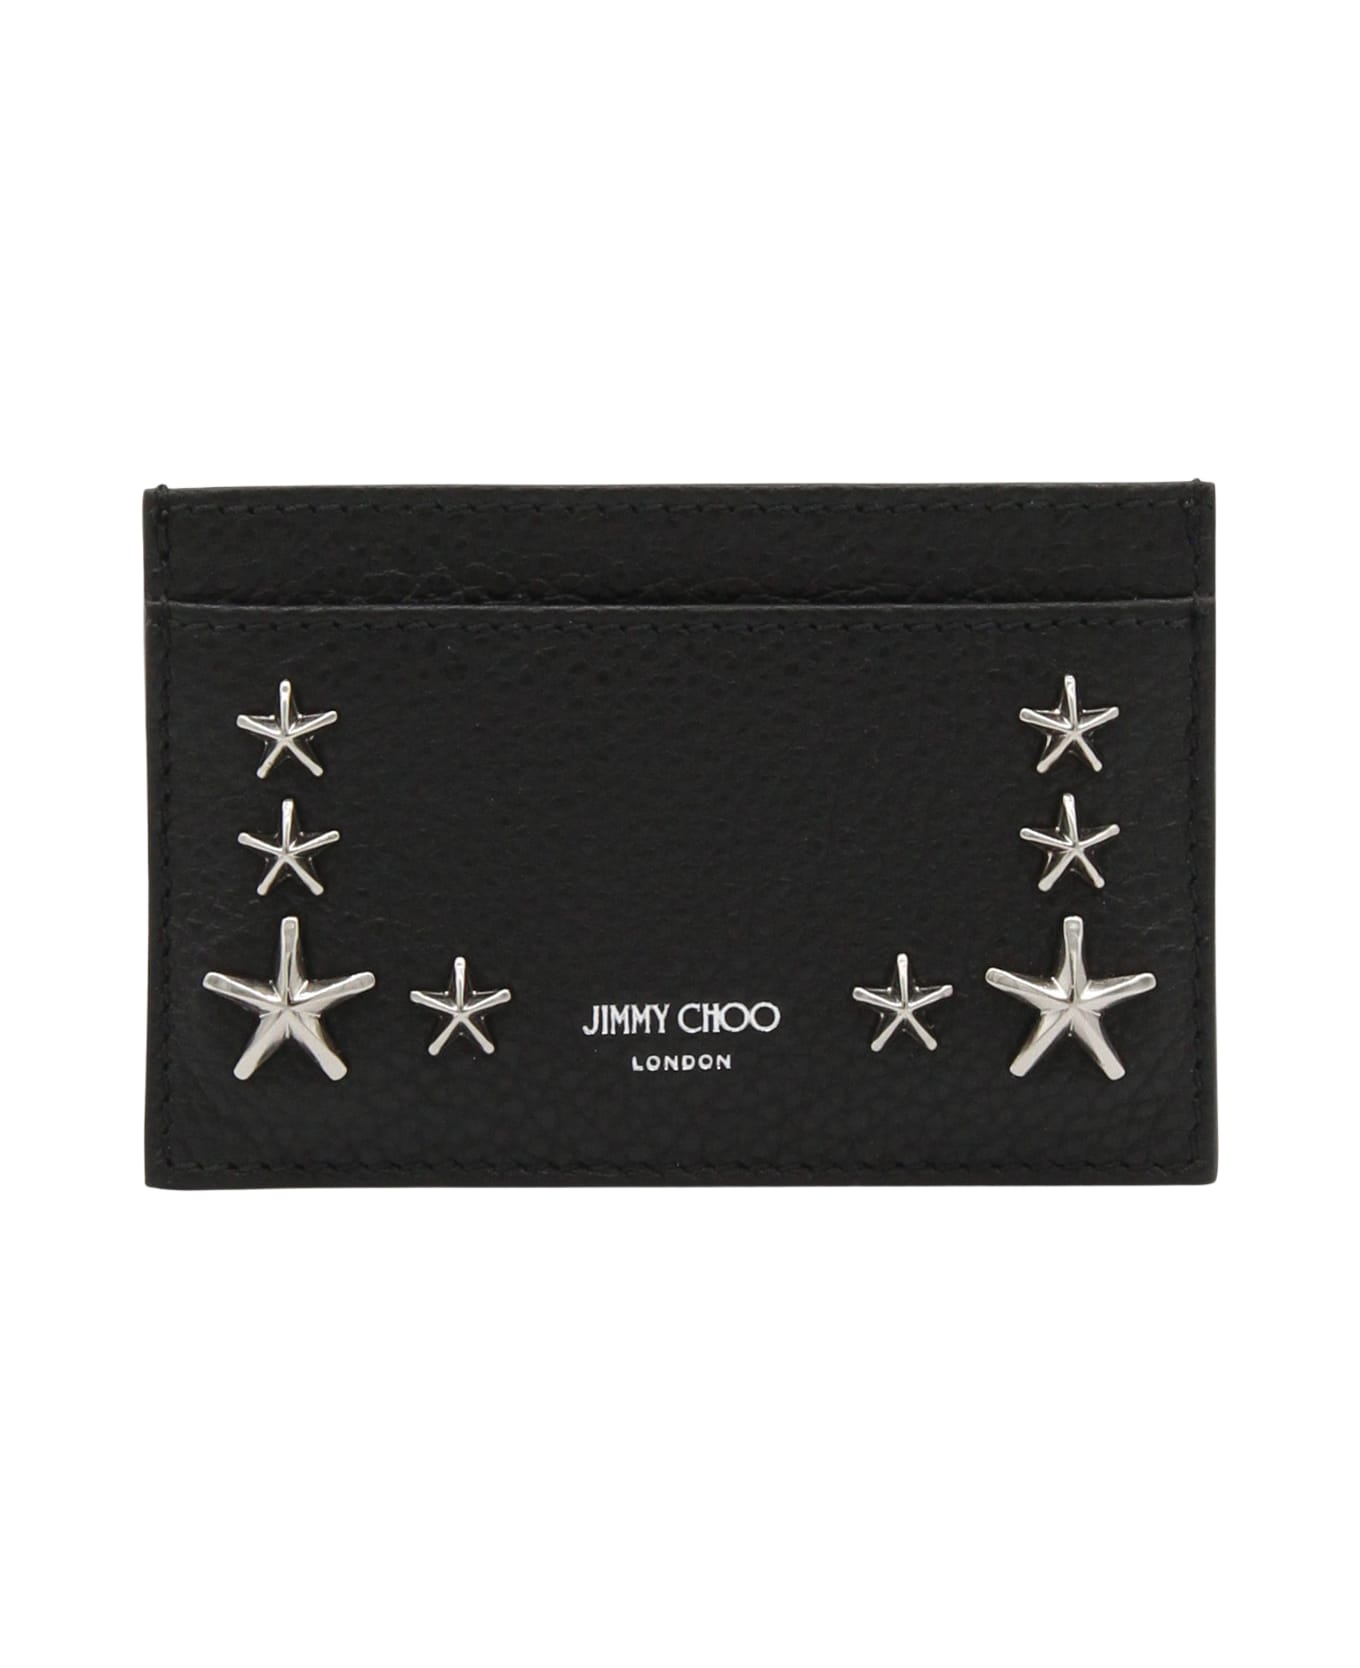 Jimmy Choo Black And Silver Leather Wallet - Black